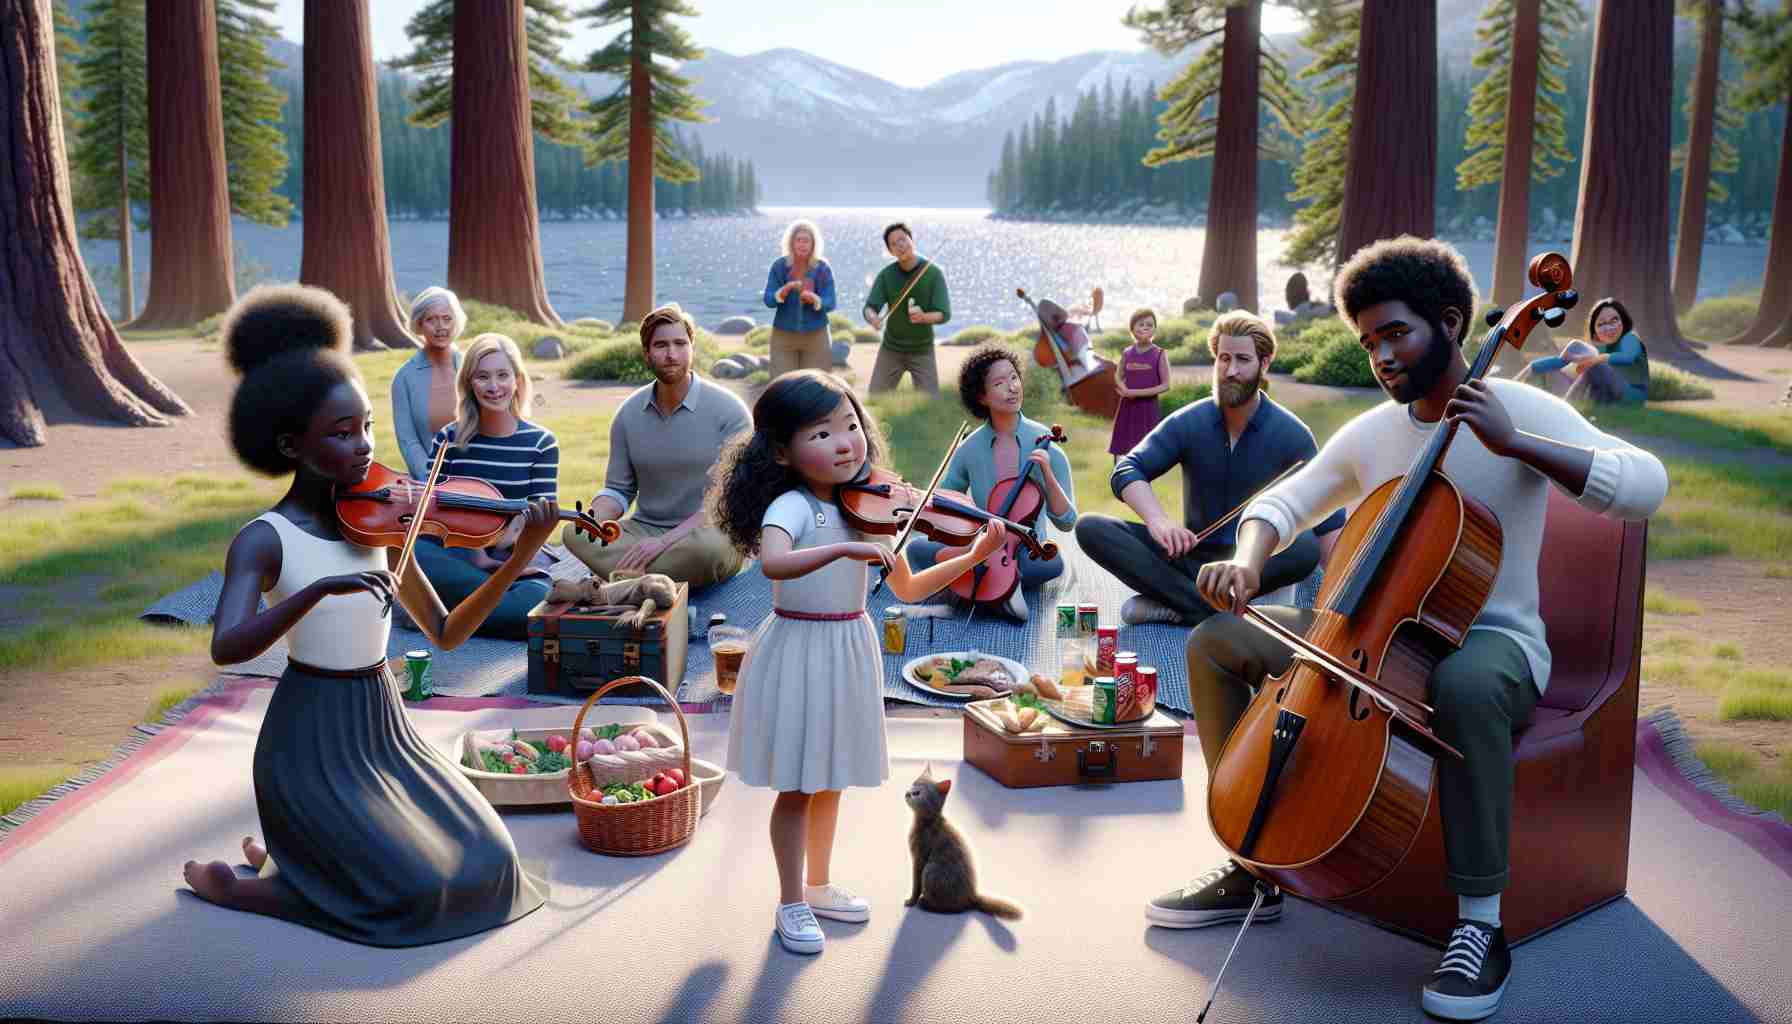 Render an HD realistic photo of a multicultural family day event at a Classical Tahoe. The scene highlights young musicians demonstrating their talents. A Caucasian girl playing the violin is front and center, her face filled with concentration. There's a Black boy beside her, impressing the audience with his cello skills. On their other side, a Hispanic girl is elegantly playing the flute. In the background, parents and children of various descents watch in awe, scattered picnic blankets, and food baskets around them, encircled by towering pine trees and the sparkling lake.